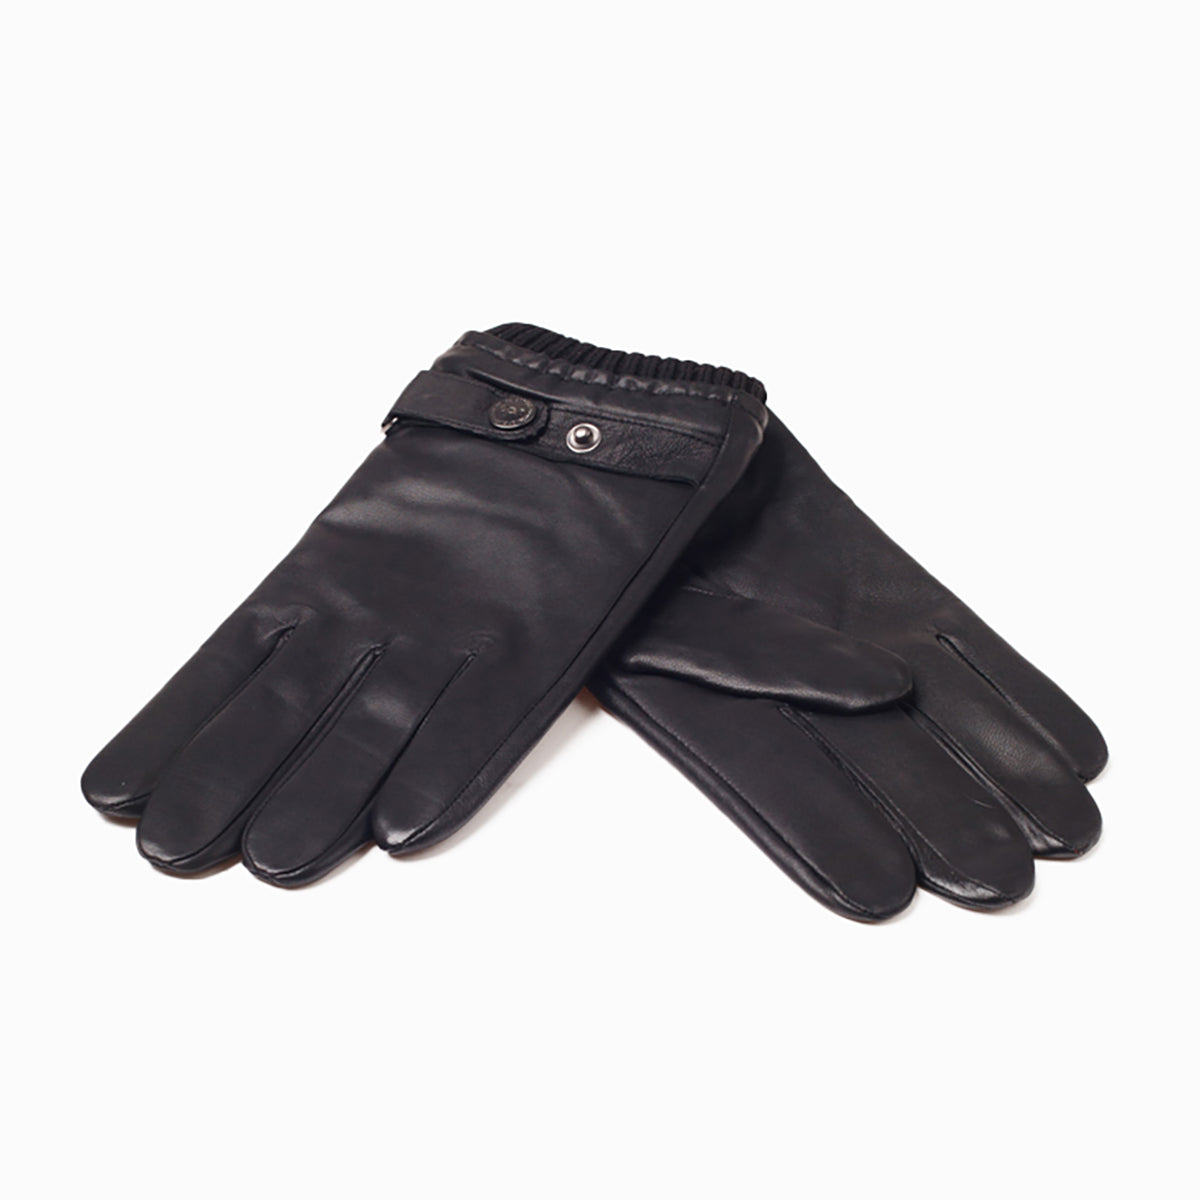 Ugg Mens Silver Stud Tab Glove (Touch Screen)-Gloves-PEROZ Accessories